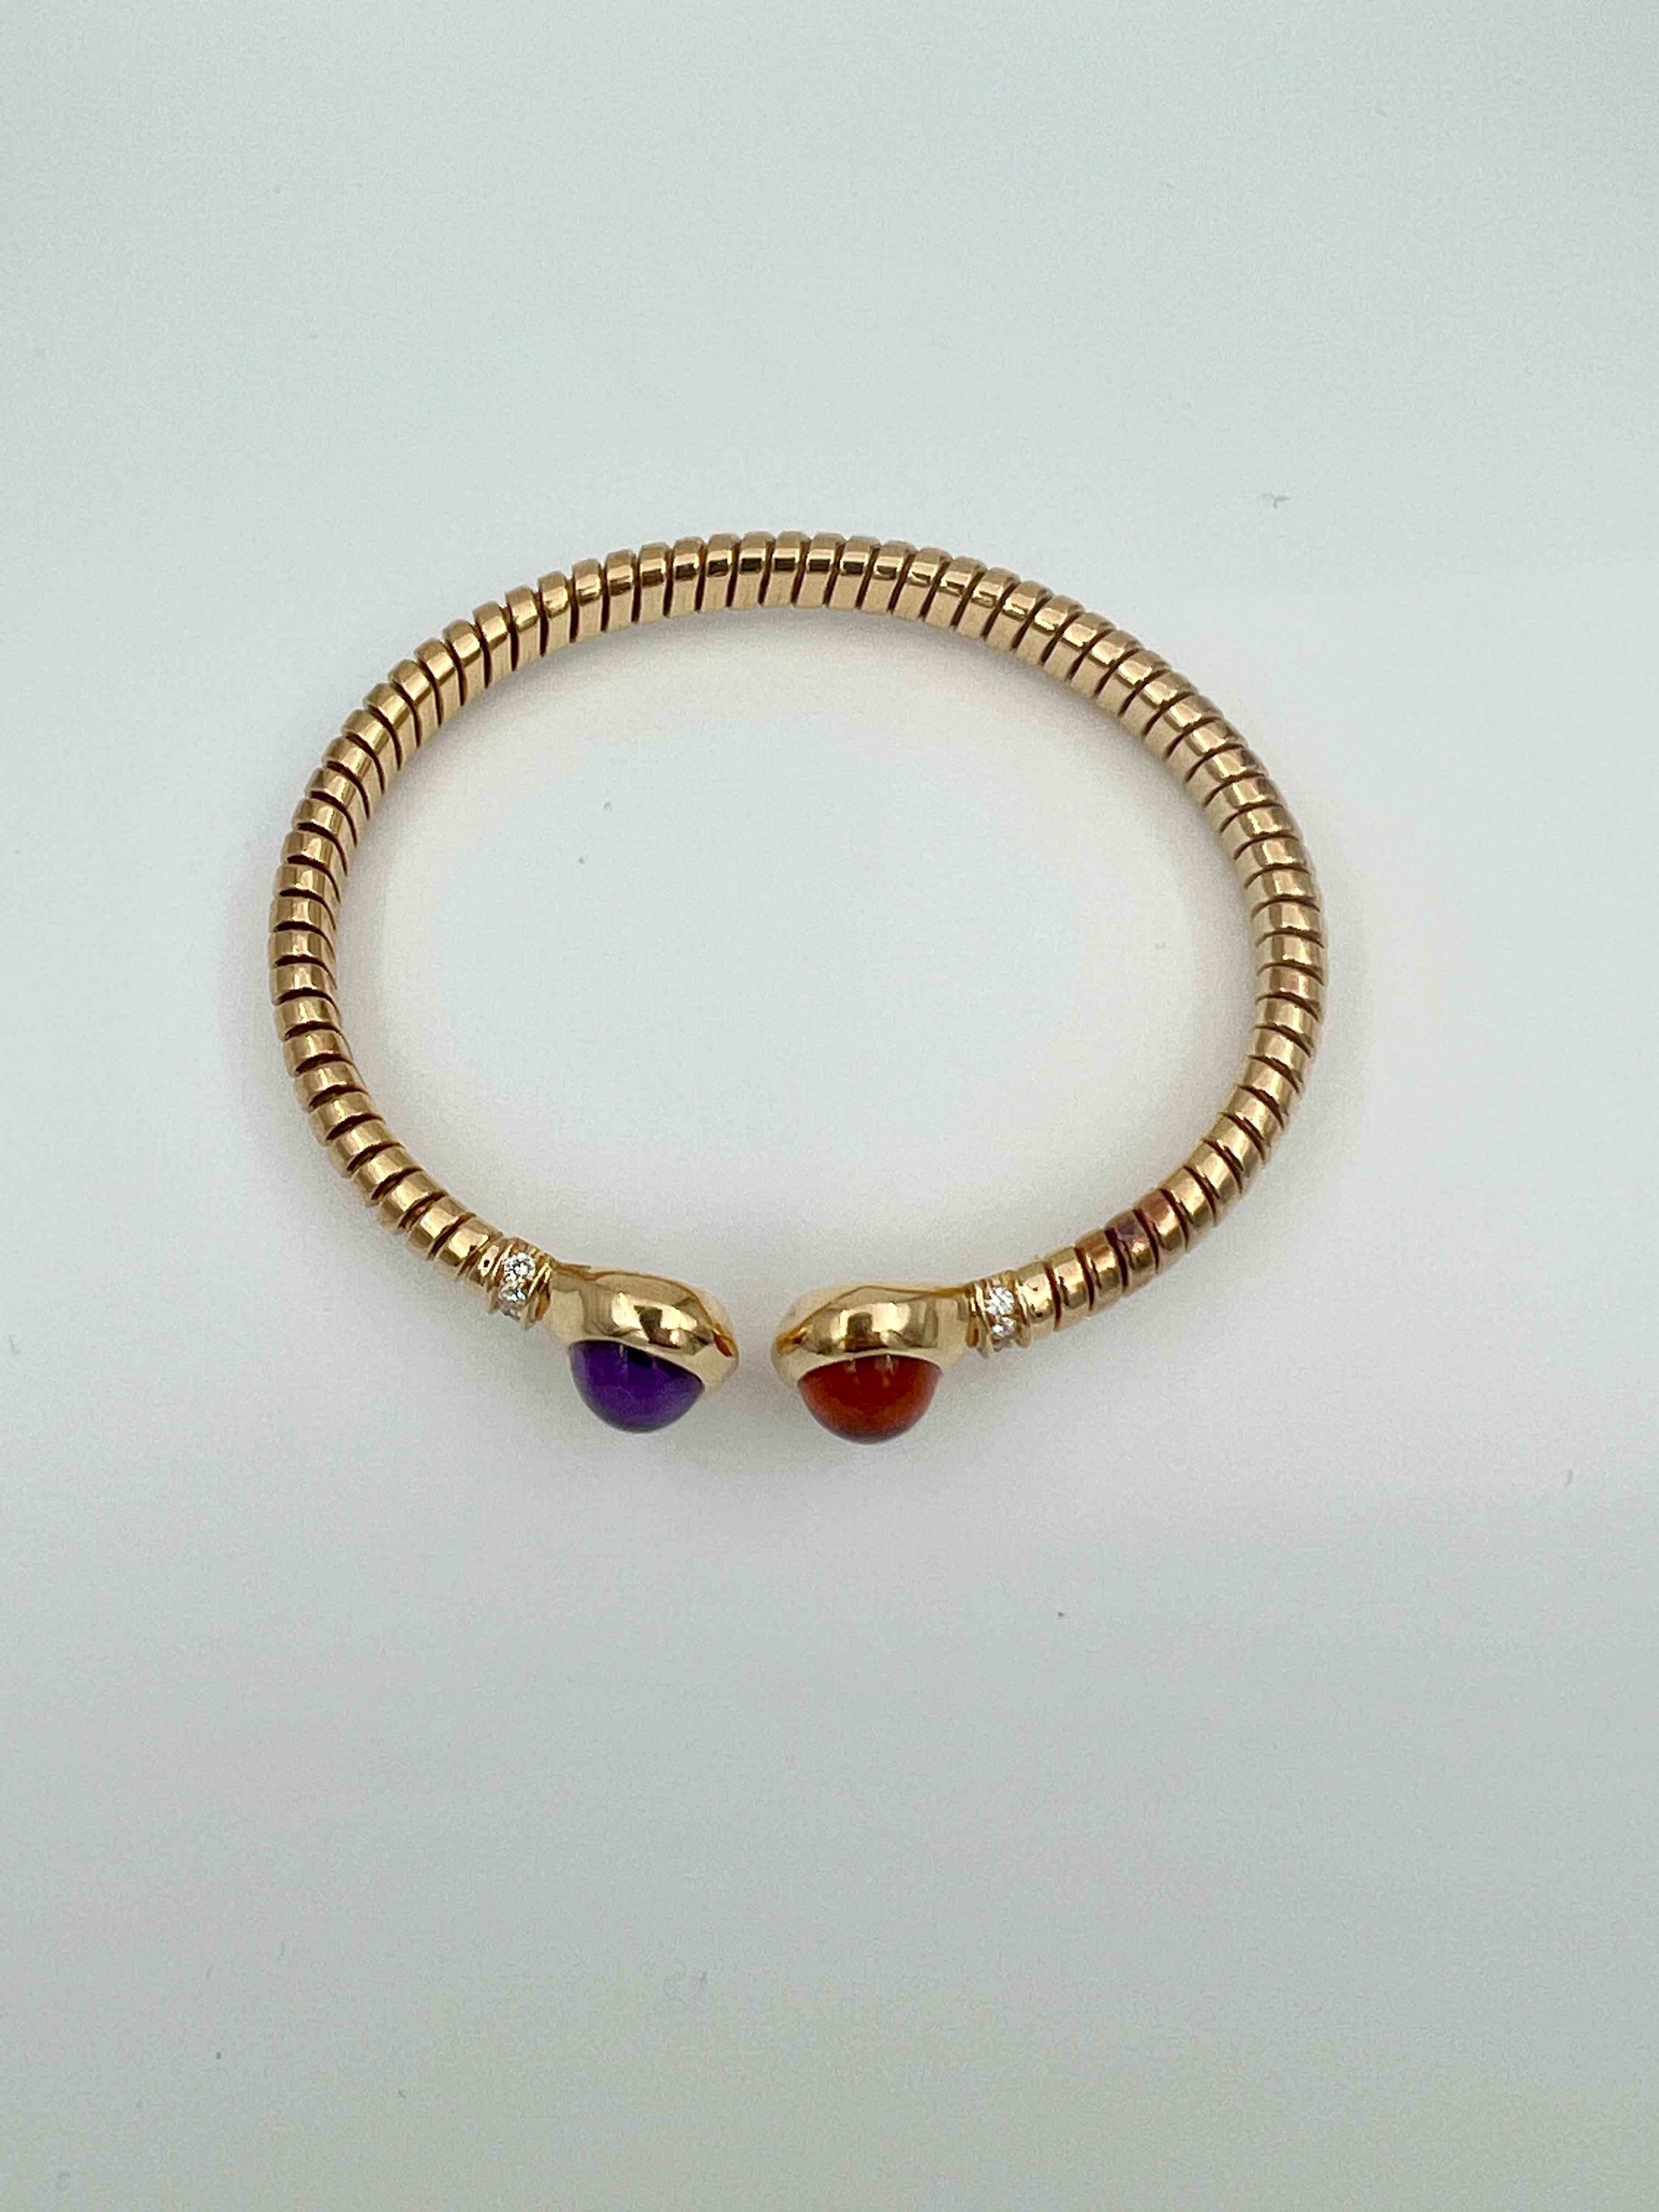 Introducing a stunning vintage Bvlgari bangle bracelet set, adorned with exquisite amethyst and citrine stones. This timeless piece exudes elegance and sophistication, making it a perfect addition to any jewelry collection. The rich, deep hues of